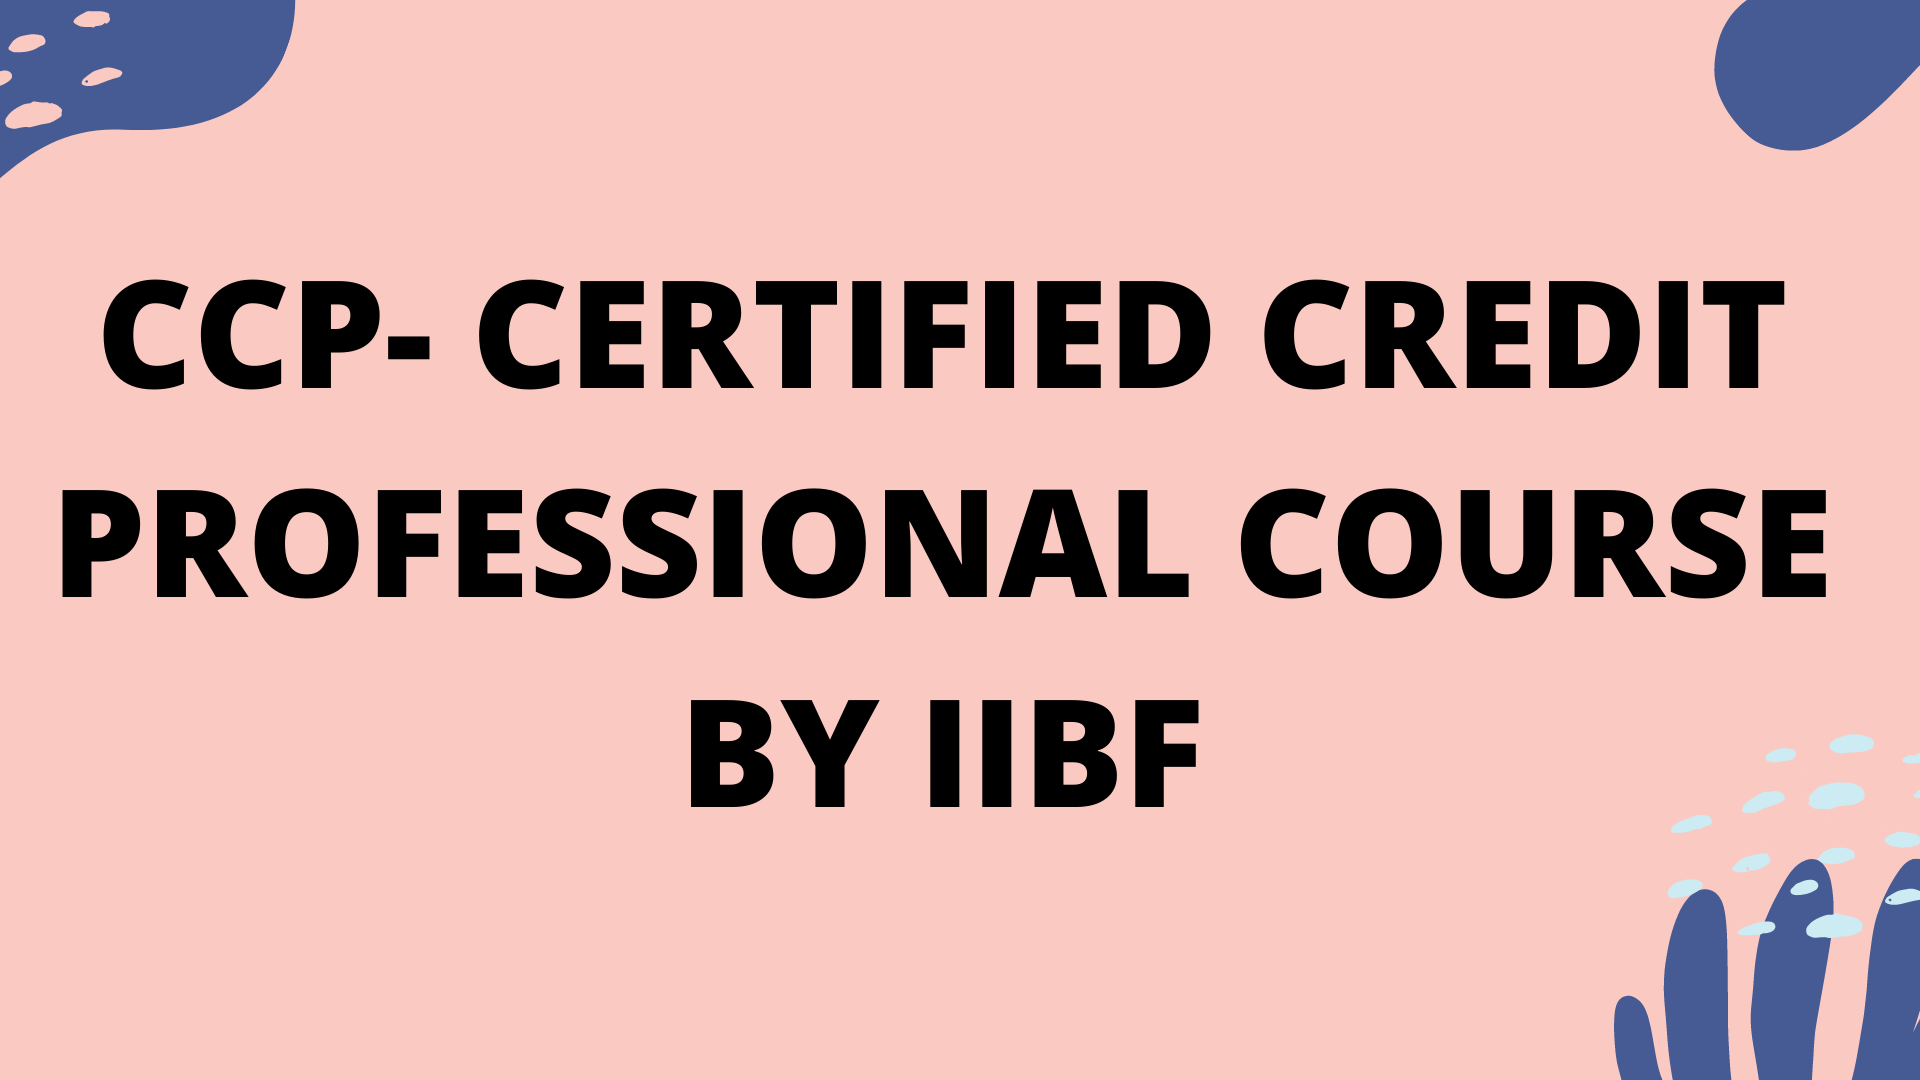 CCP- Certified Credit Professional